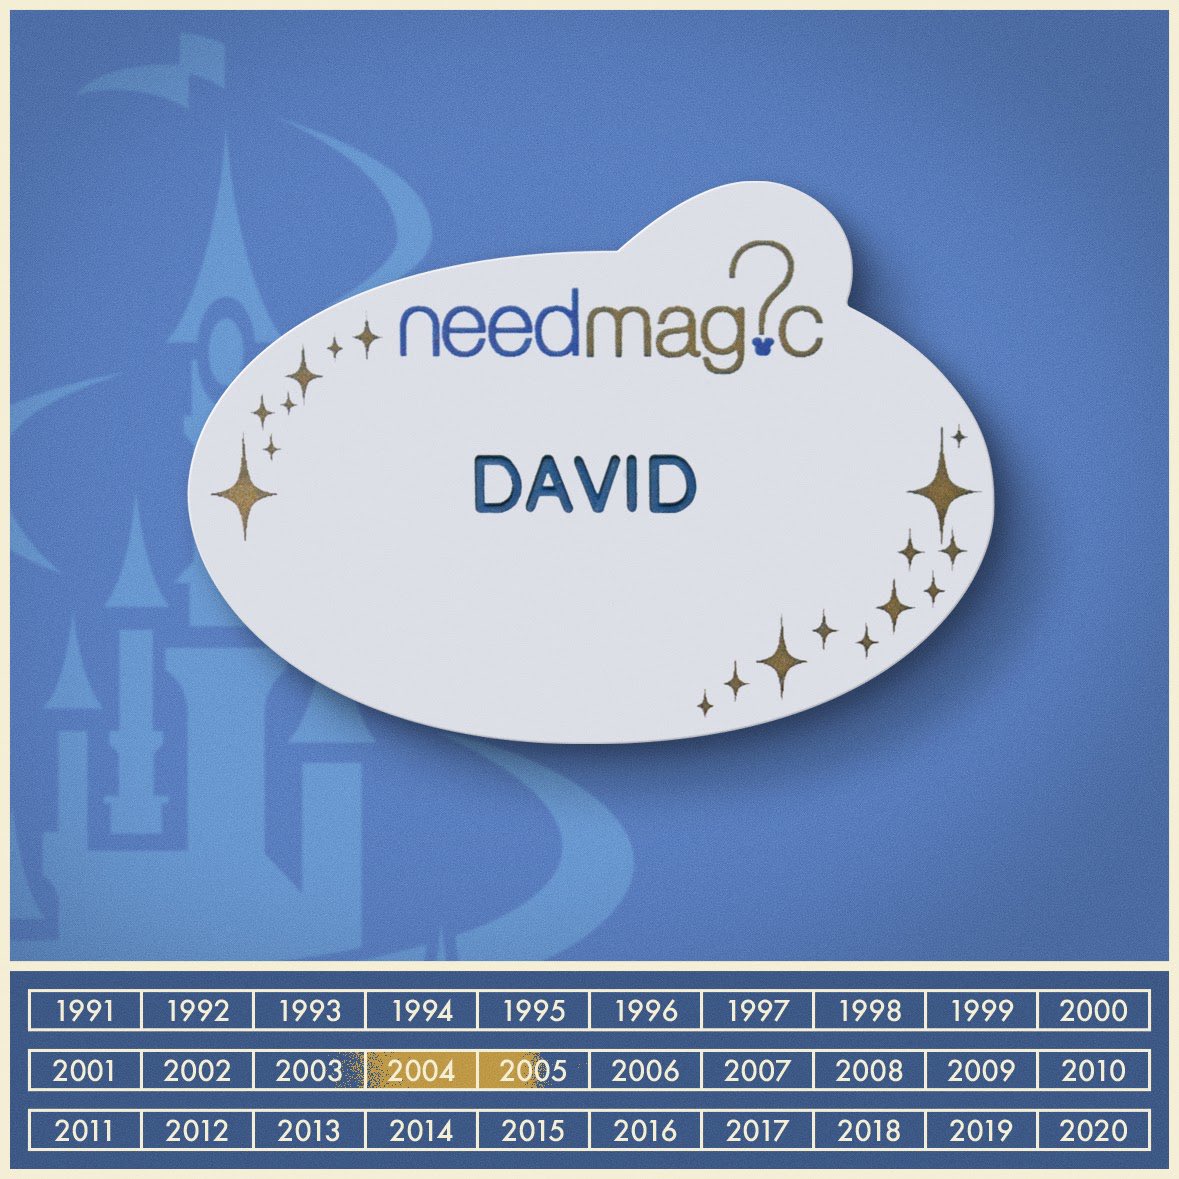 “needmag?c” was a major marketing initiative spawning an interactive (pre-social media) online campaign, a Euro-pop CD single and this new nametag design, which happened to be my very first one when I joined the company in March 2004.